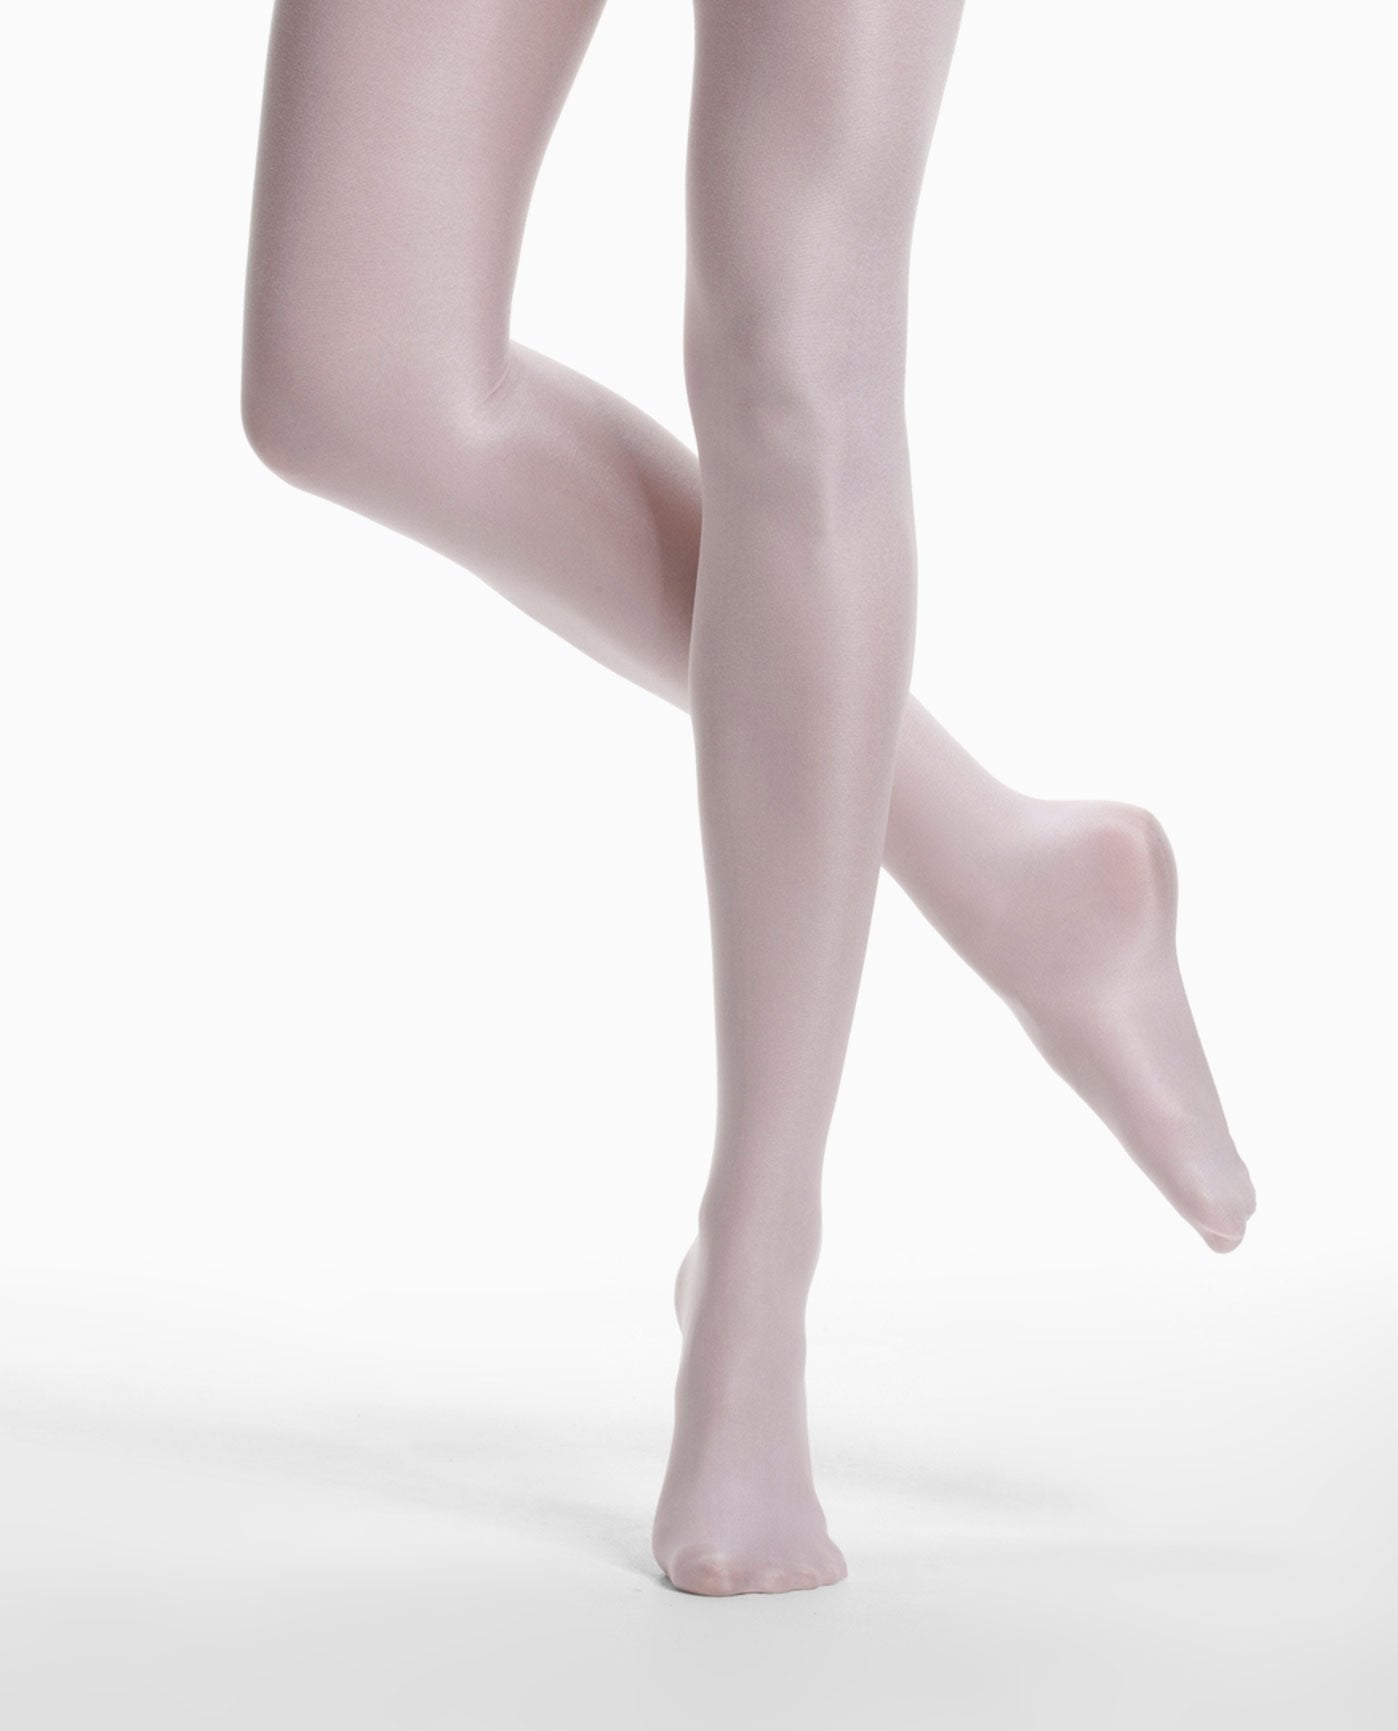 Pridance Ultra Shimmery Tights 515/N